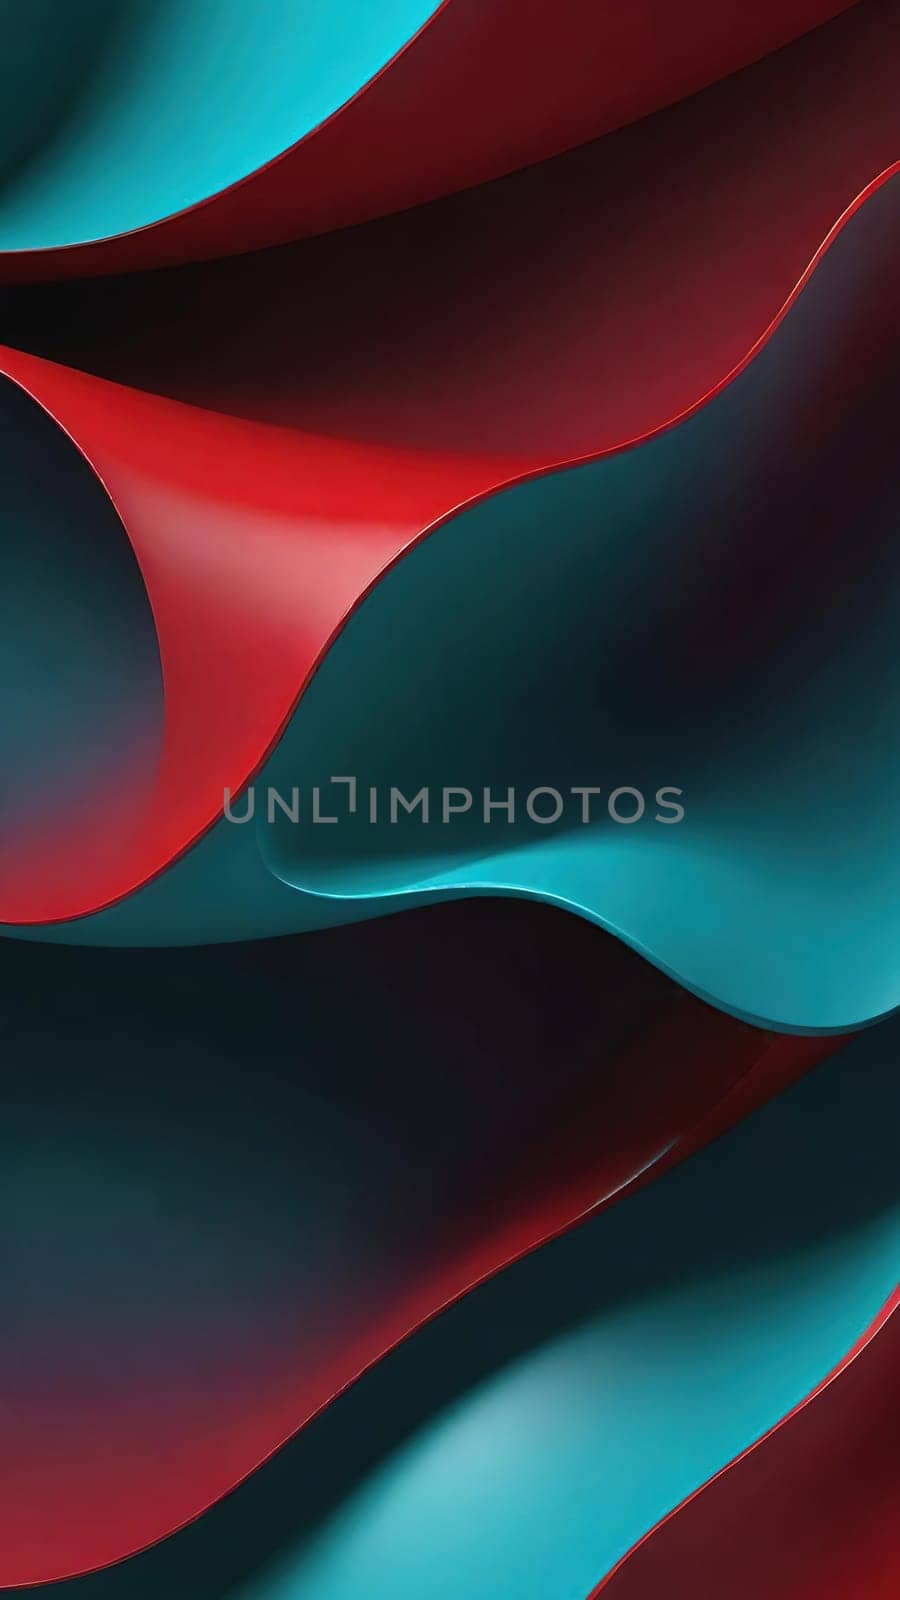 Abstract background with red, blue and green curved sheets of paper. by yilmazsavaskandag